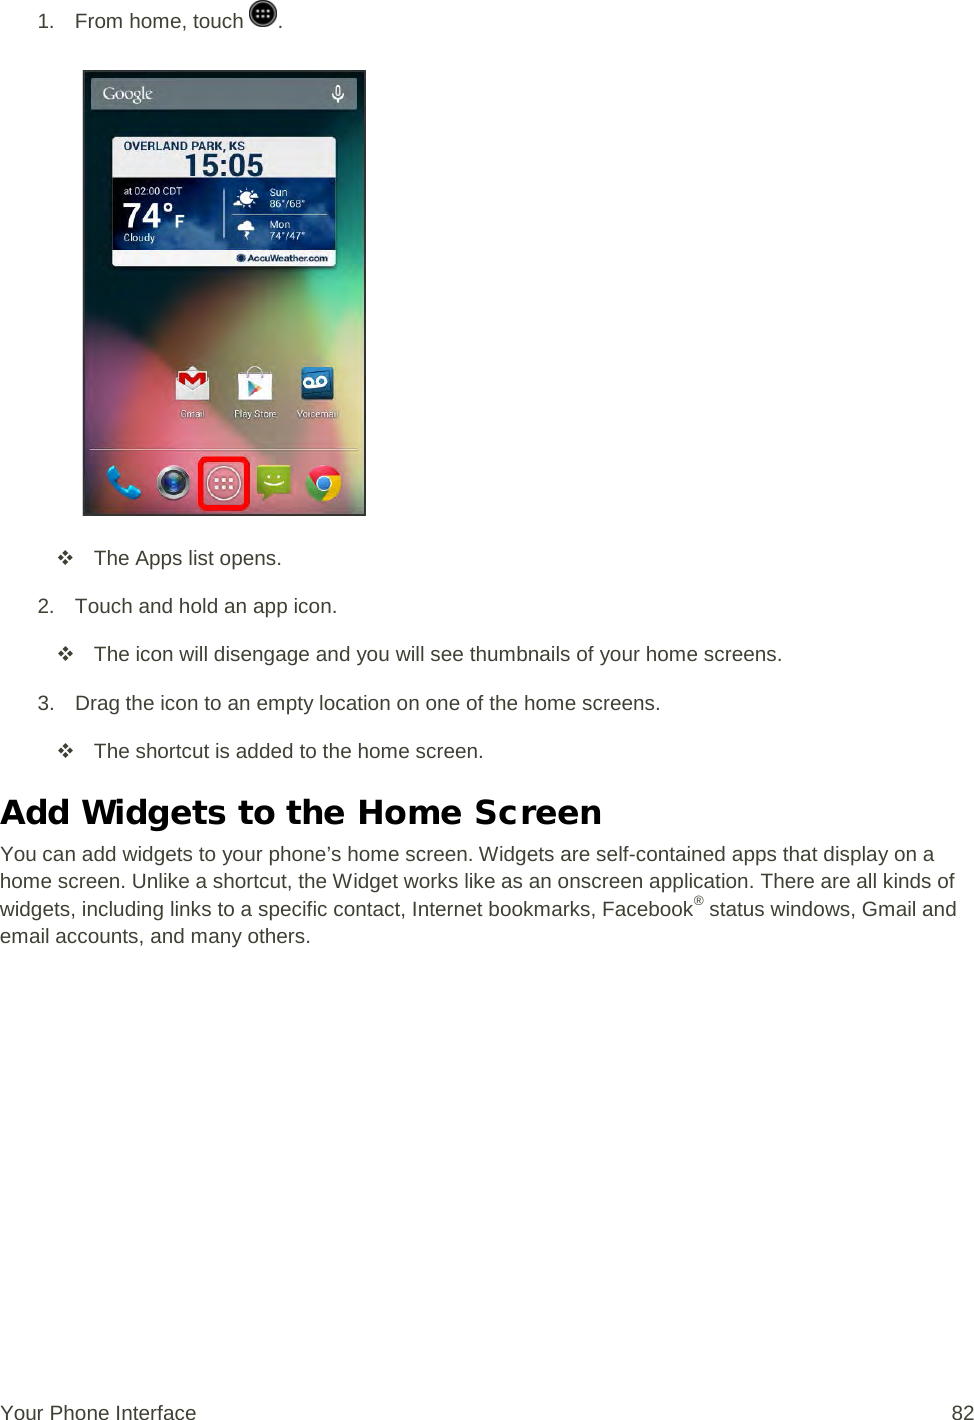 1.  From home, touch  .    The Apps list opens. 2. Touch and hold an app icon.  The icon will disengage and you will see thumbnails of your home screens. 3. Drag the icon to an empty location on one of the home screens.  The shortcut is added to the home screen. Add Widgets to the Home Screen You can add widgets to your phone’s home screen. Widgets are self-contained apps that display on a home screen. Unlike a shortcut, the Widget works like as an onscreen application. There are all kinds of widgets, including links to a specific contact, Internet bookmarks, Facebook® status windows, Gmail and email accounts, and many others. Your Phone Interface 82 